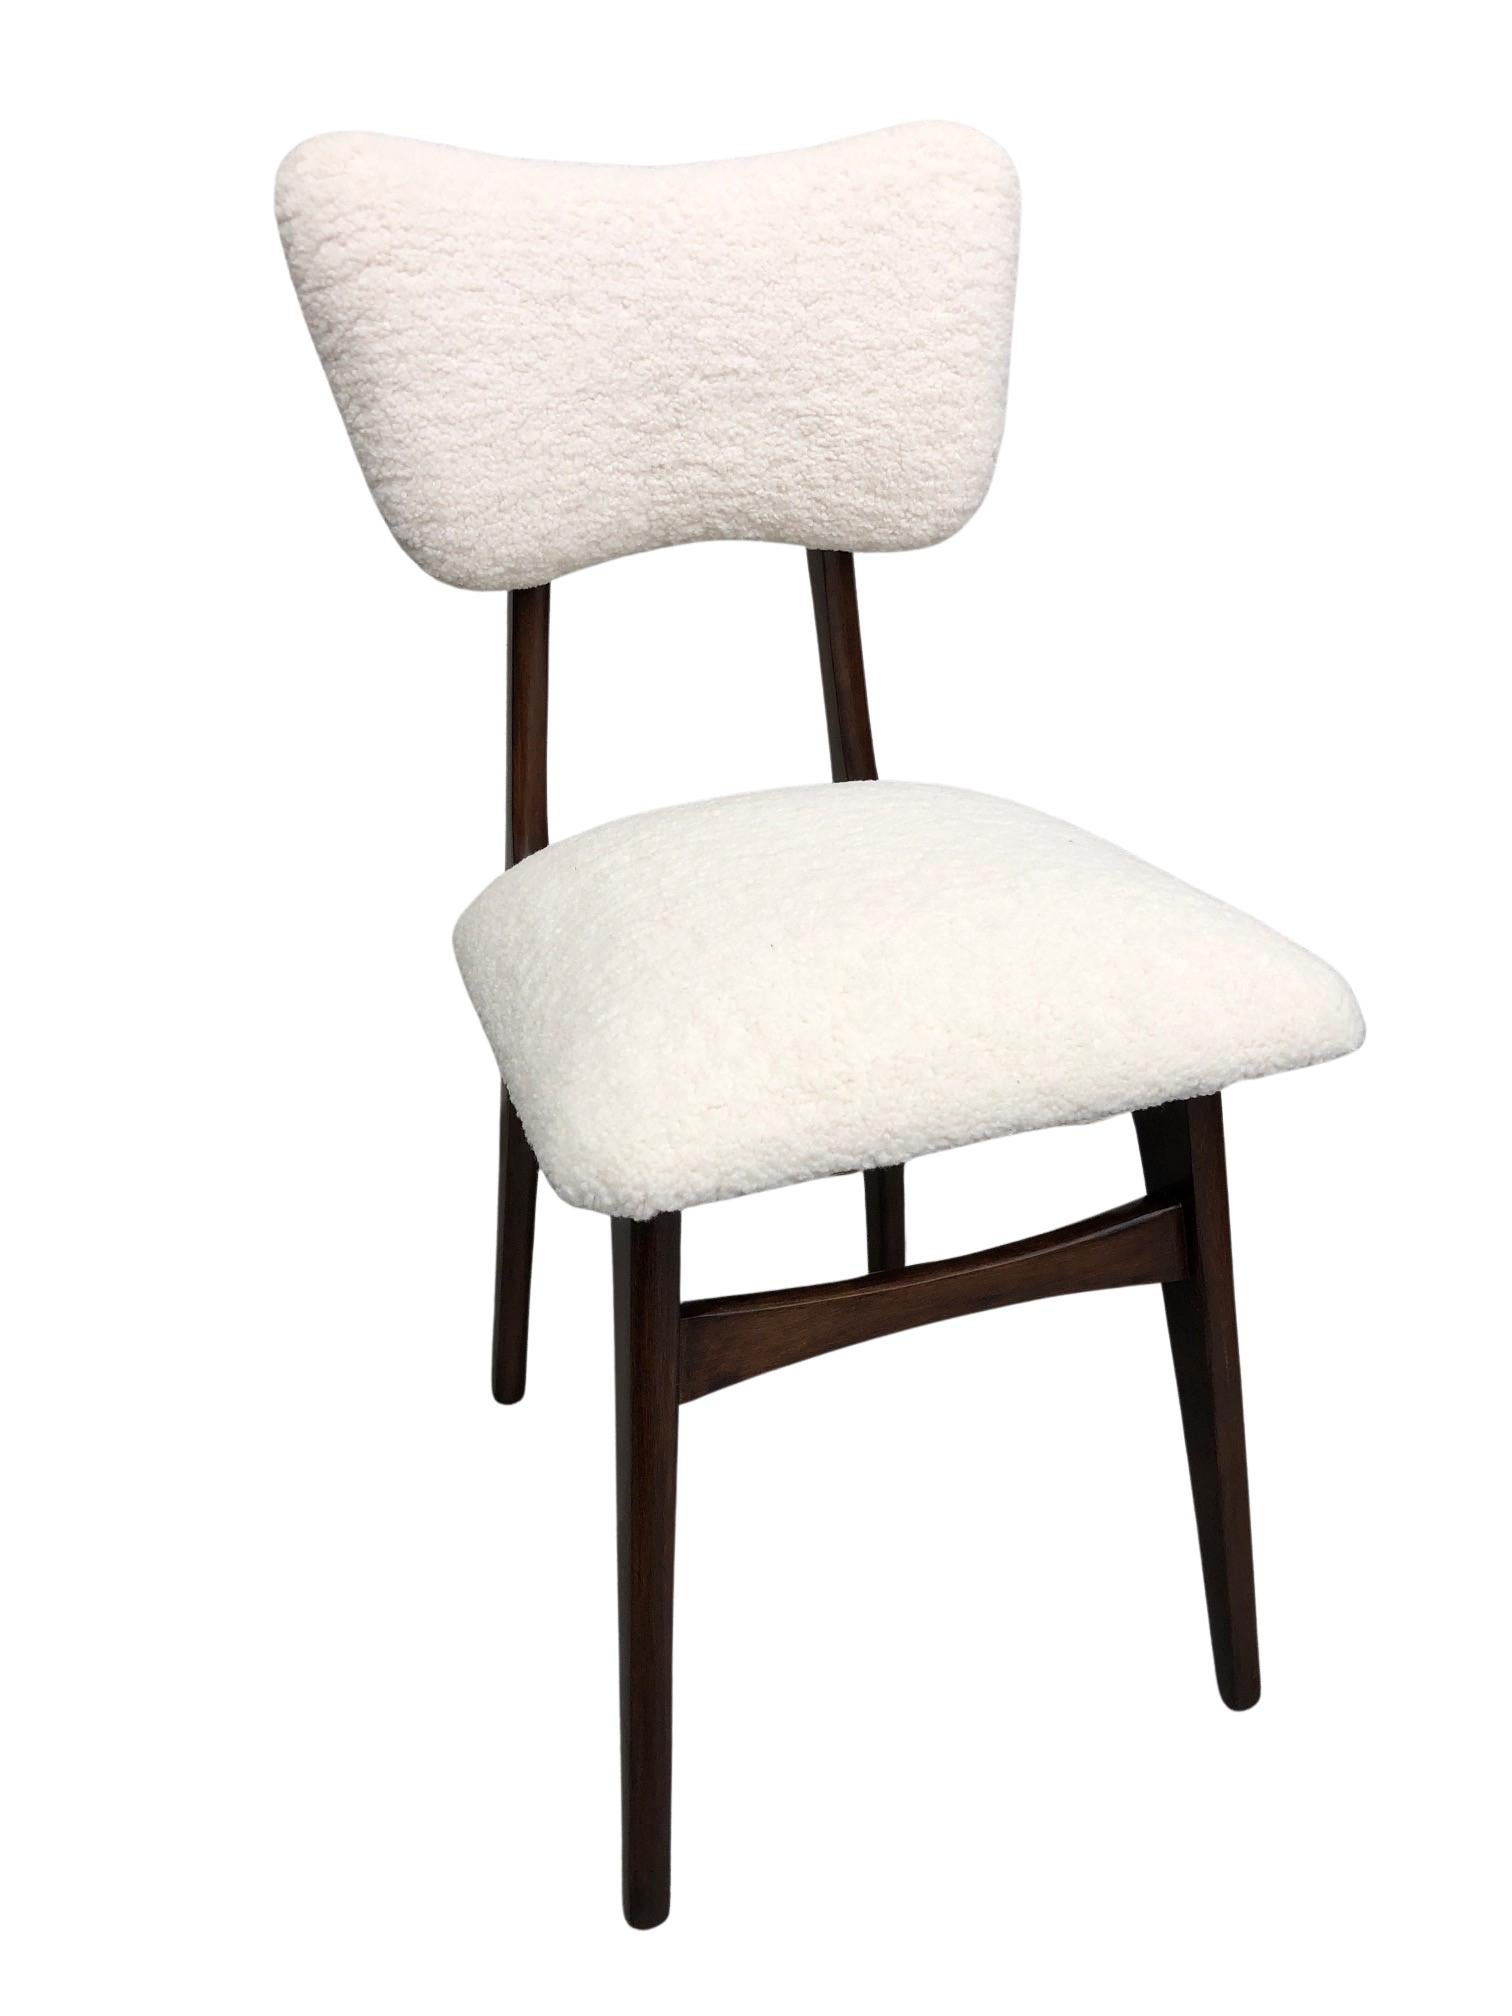 Mid-Century Beige Boucle and Dark Wood Dining Chair, Europe, 1960s For Sale 2